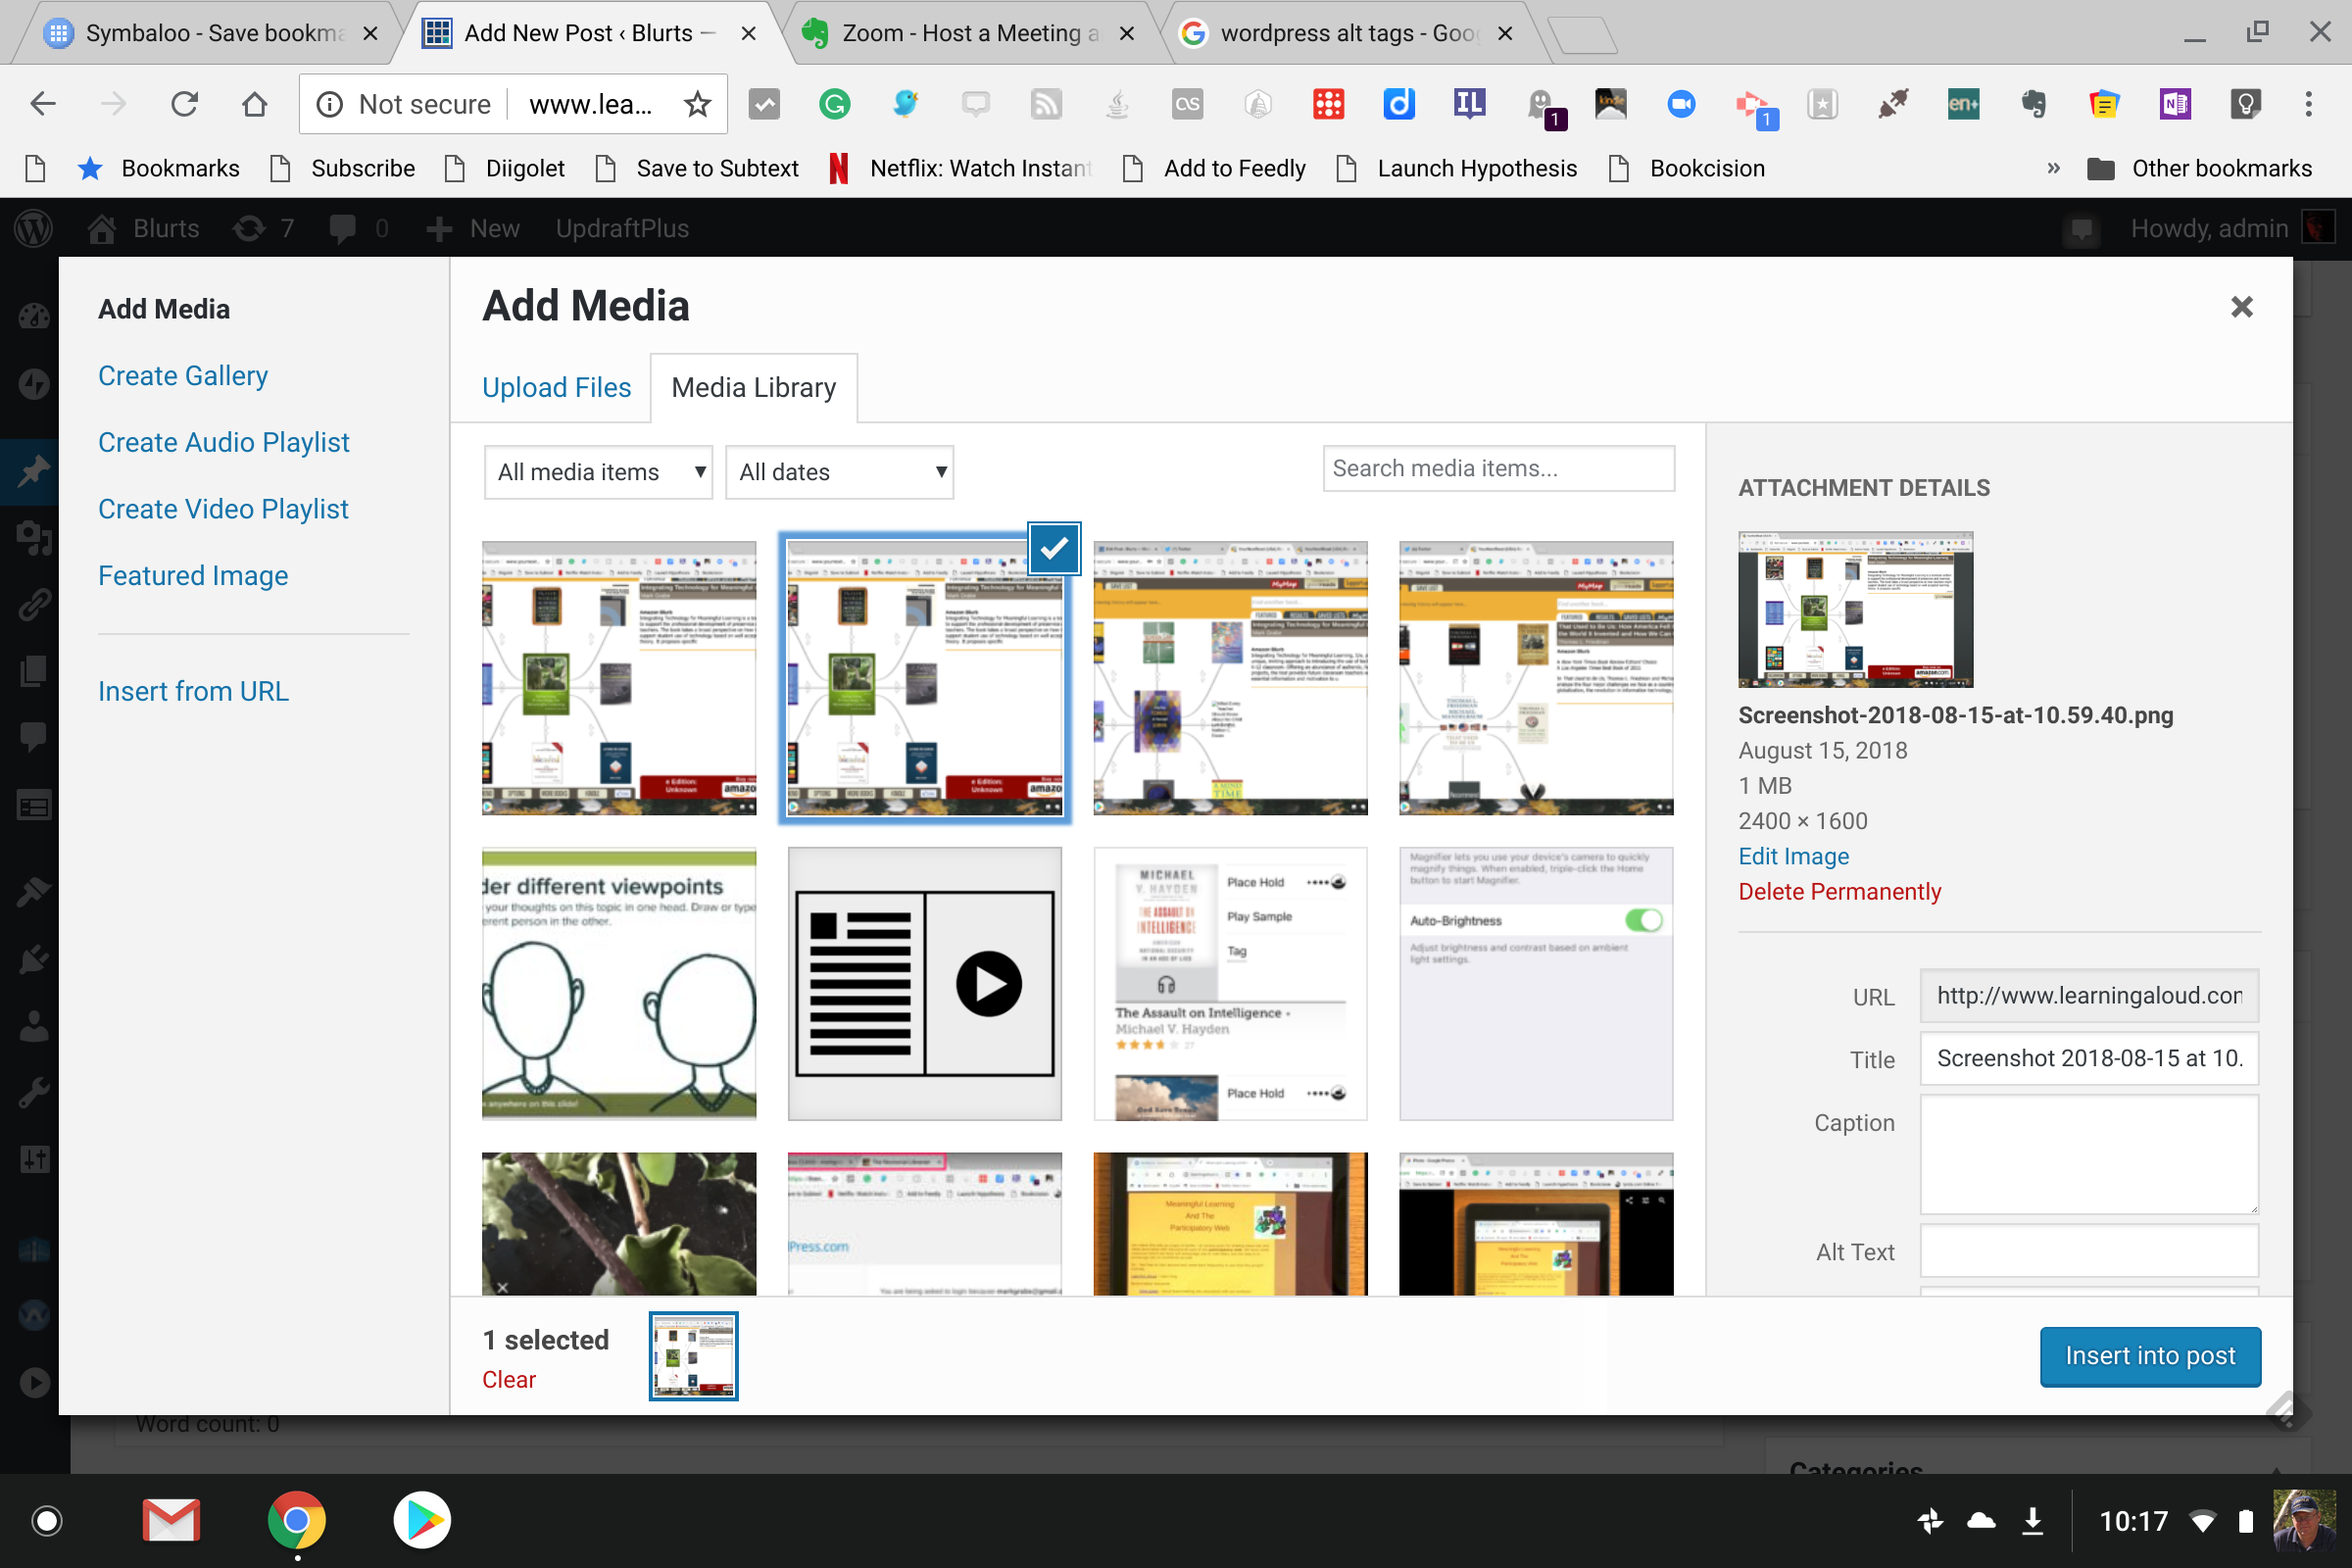 This is a sample view of the WordPress tool for adding media showing where the alt text input can be added.